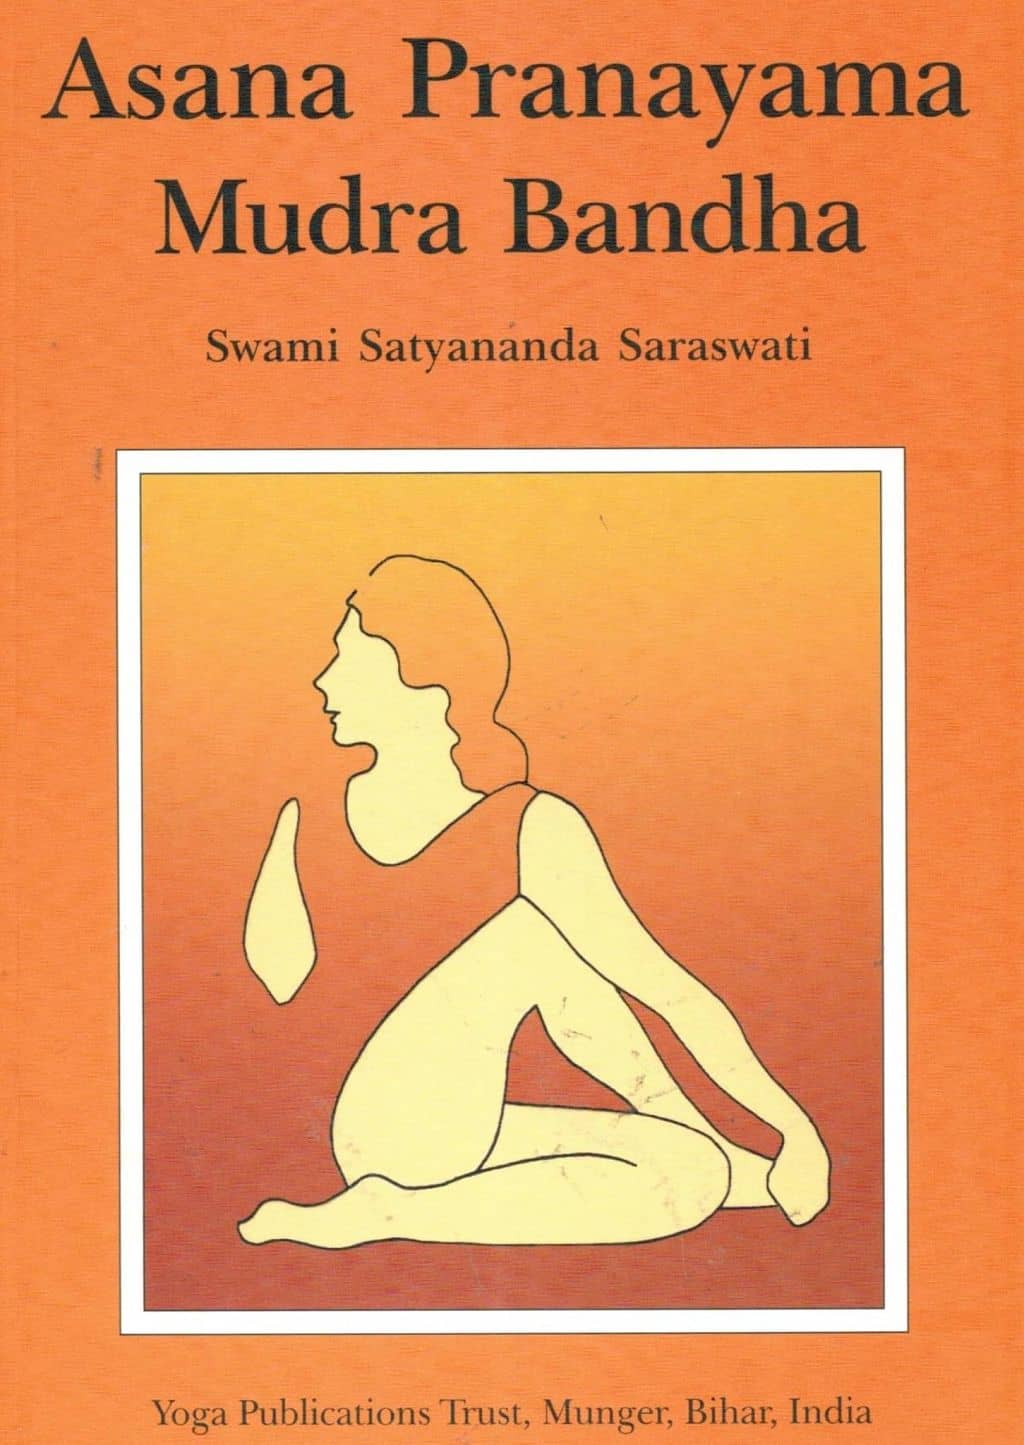 book for yoga